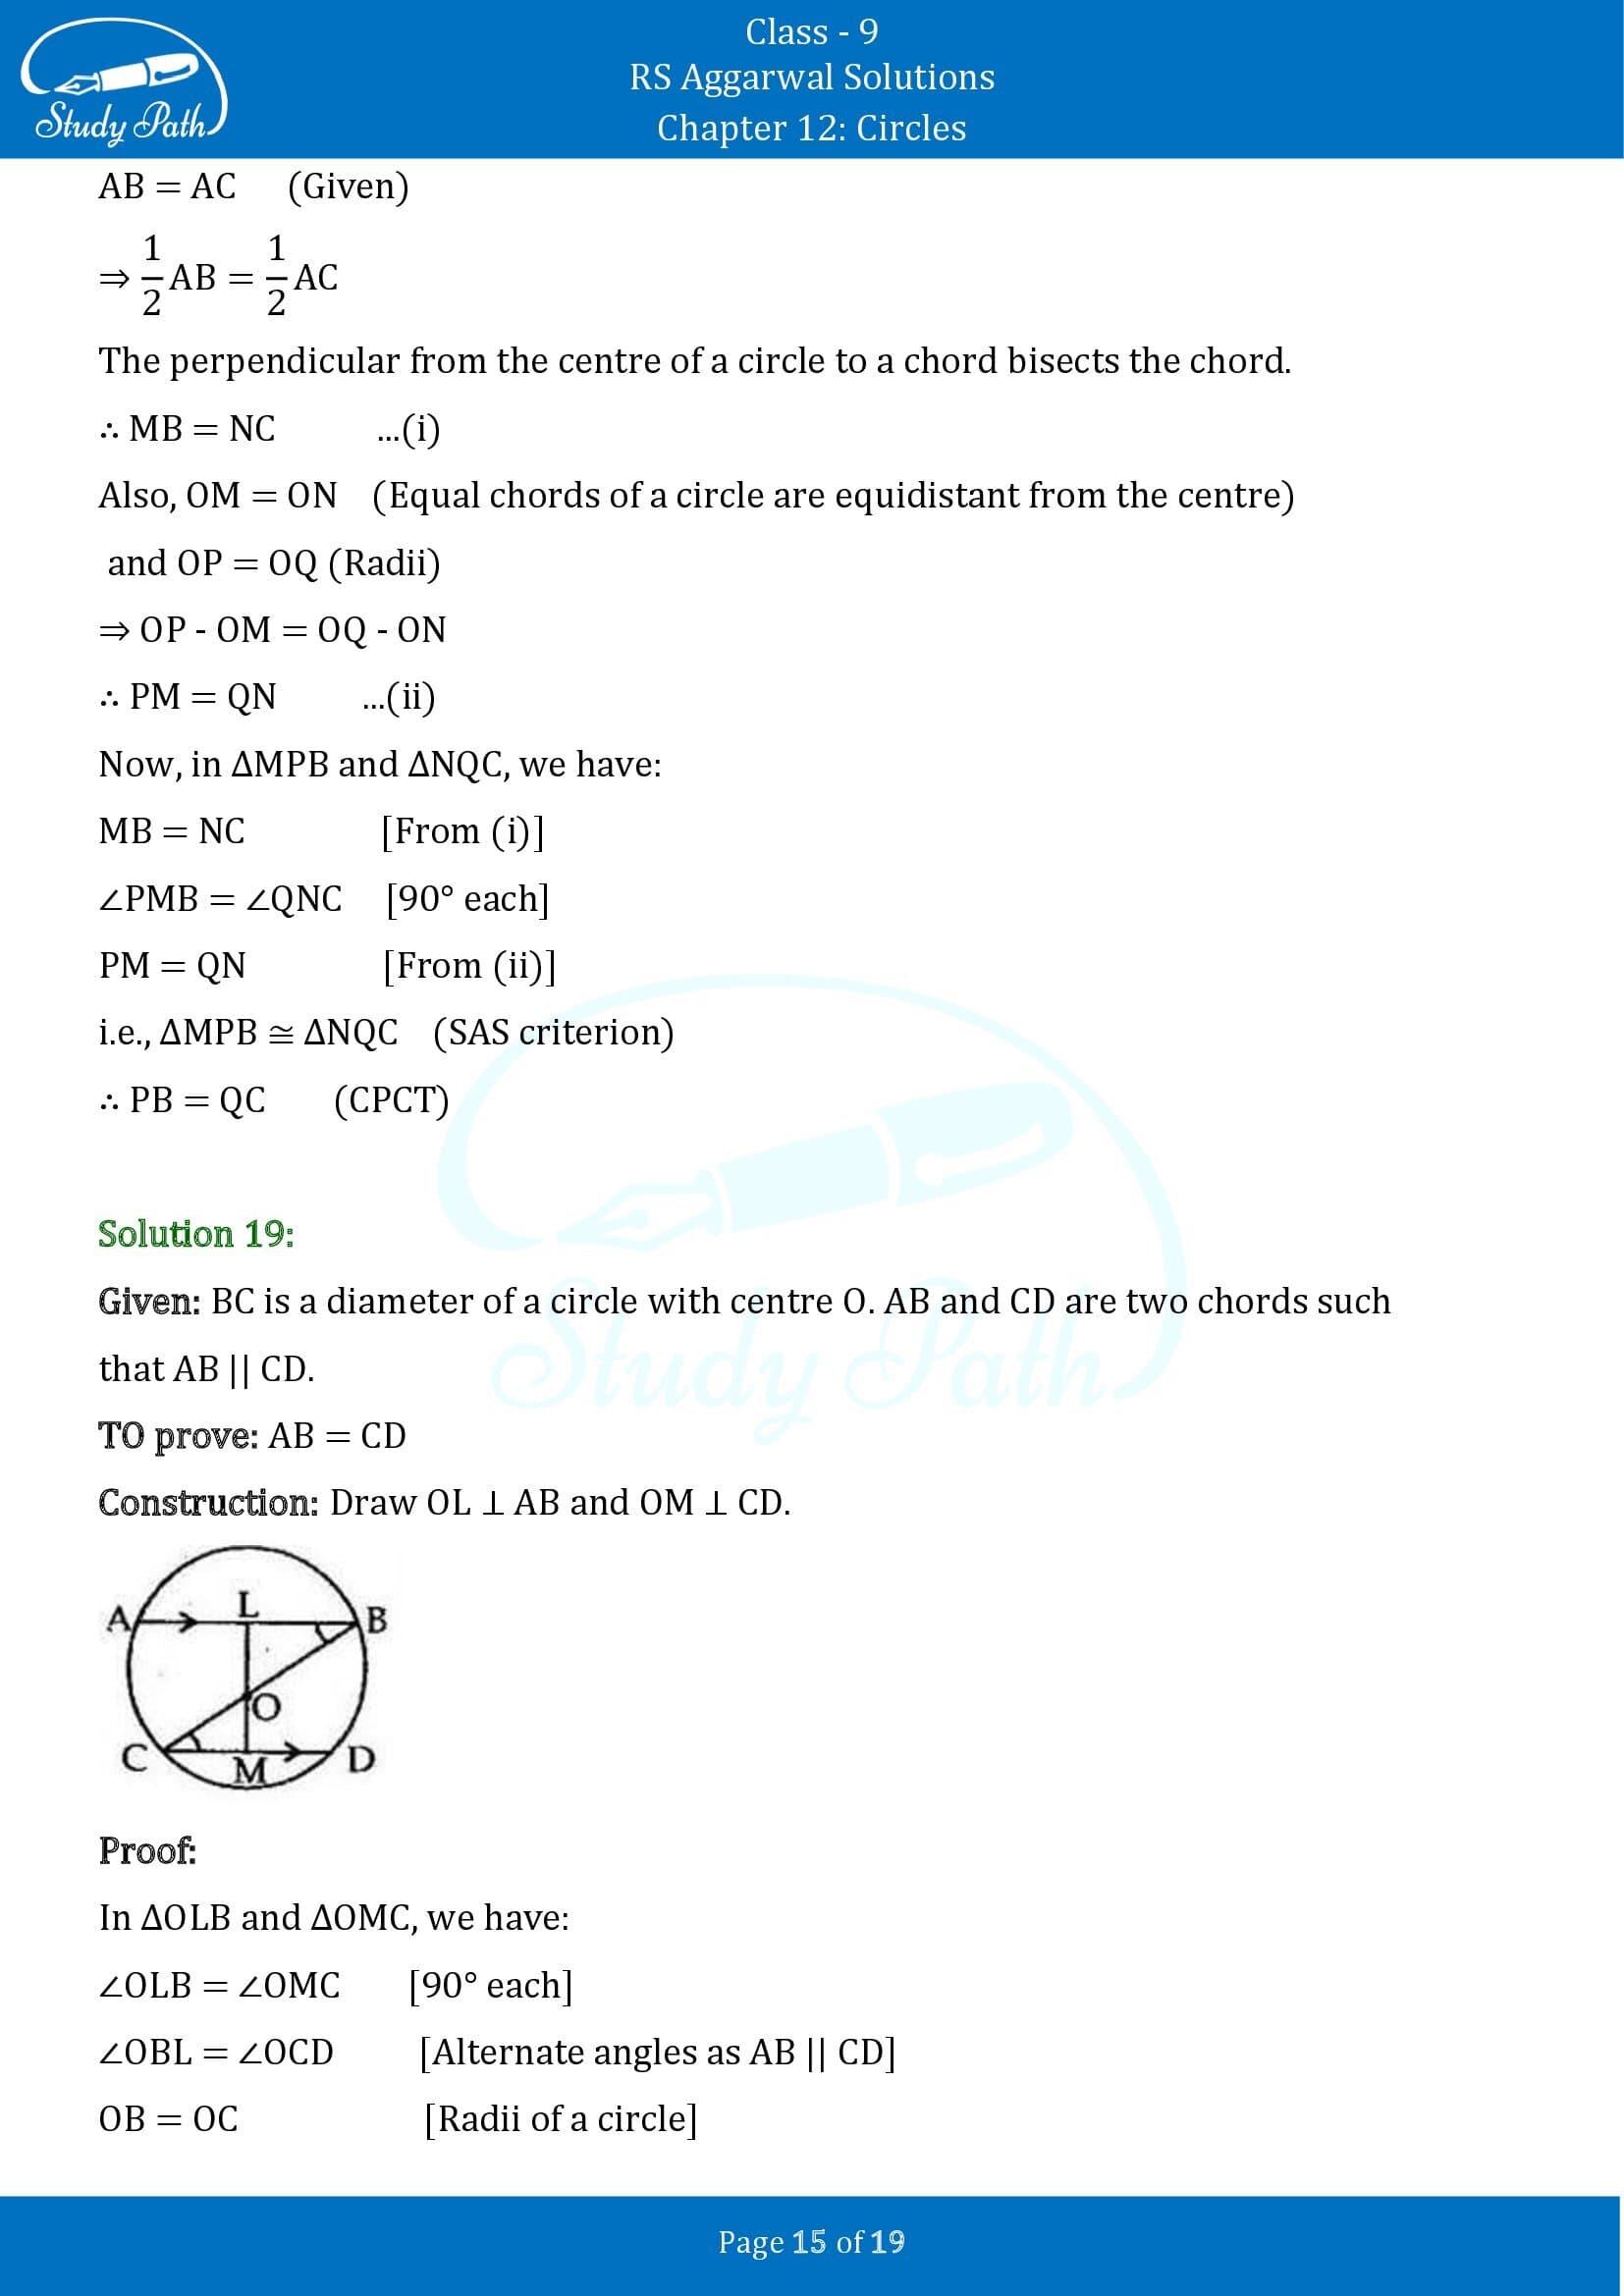 RS Aggarwal Solutions Class 9 Chapter 12 Circles Exercise 12A 00015